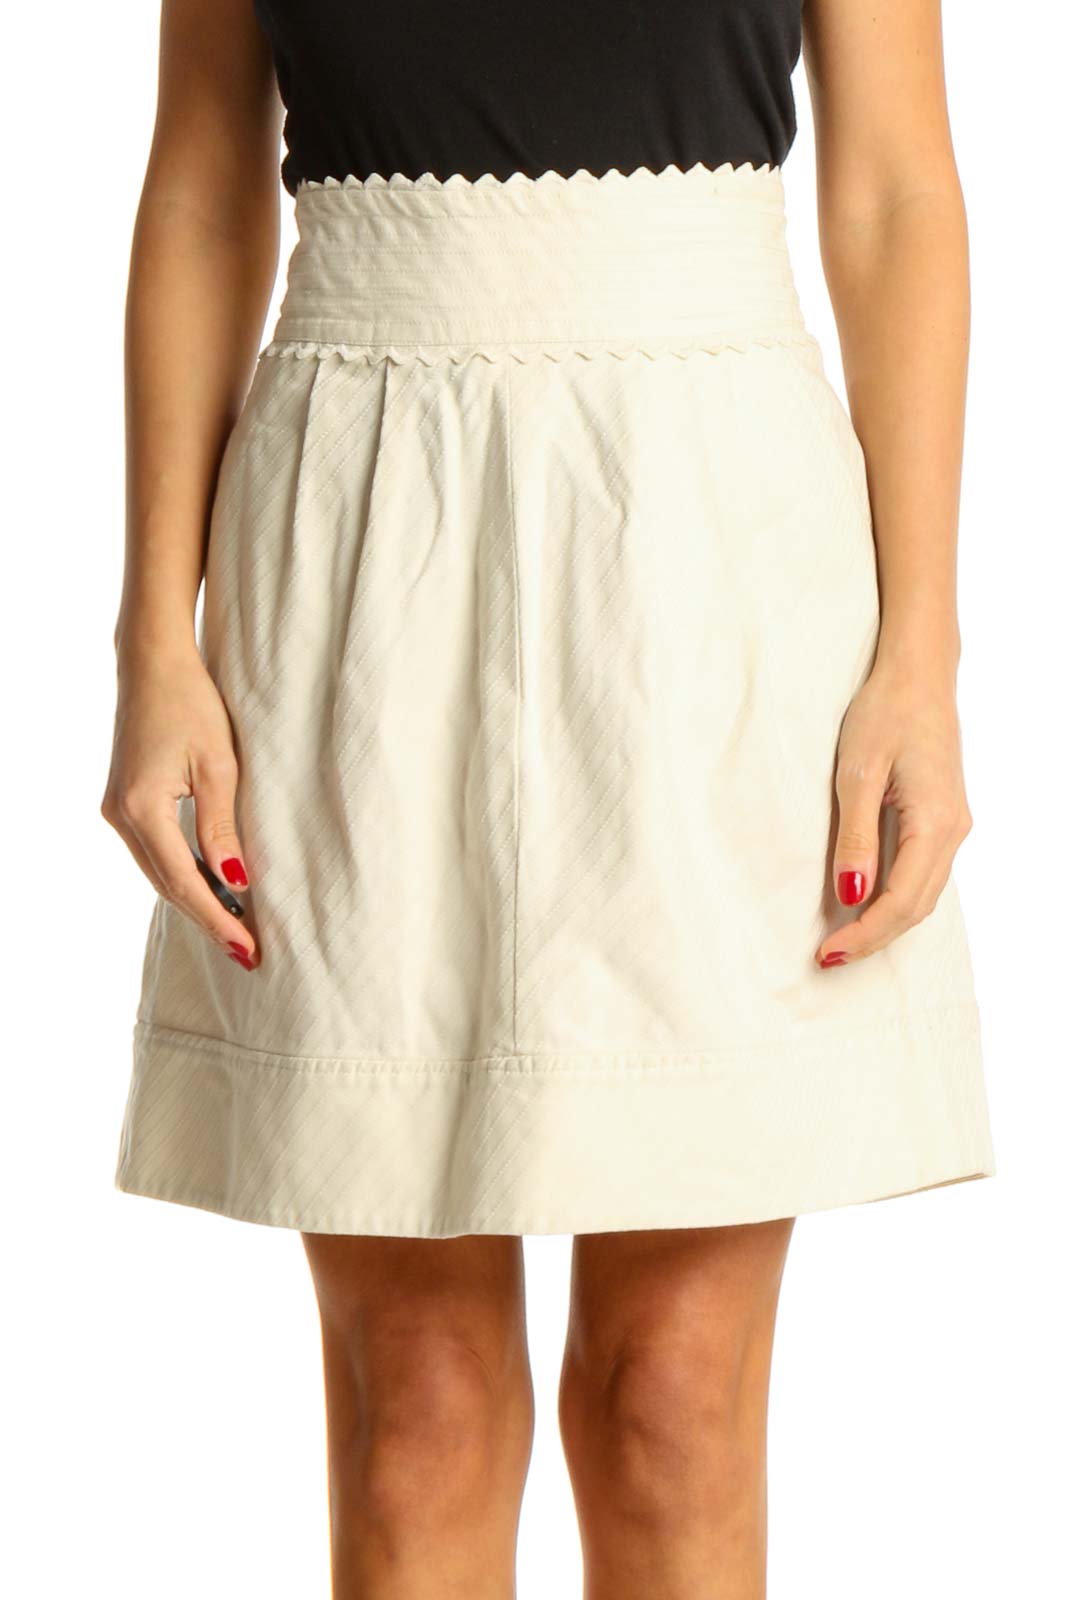 Beige Chic A-Line Skirt Front